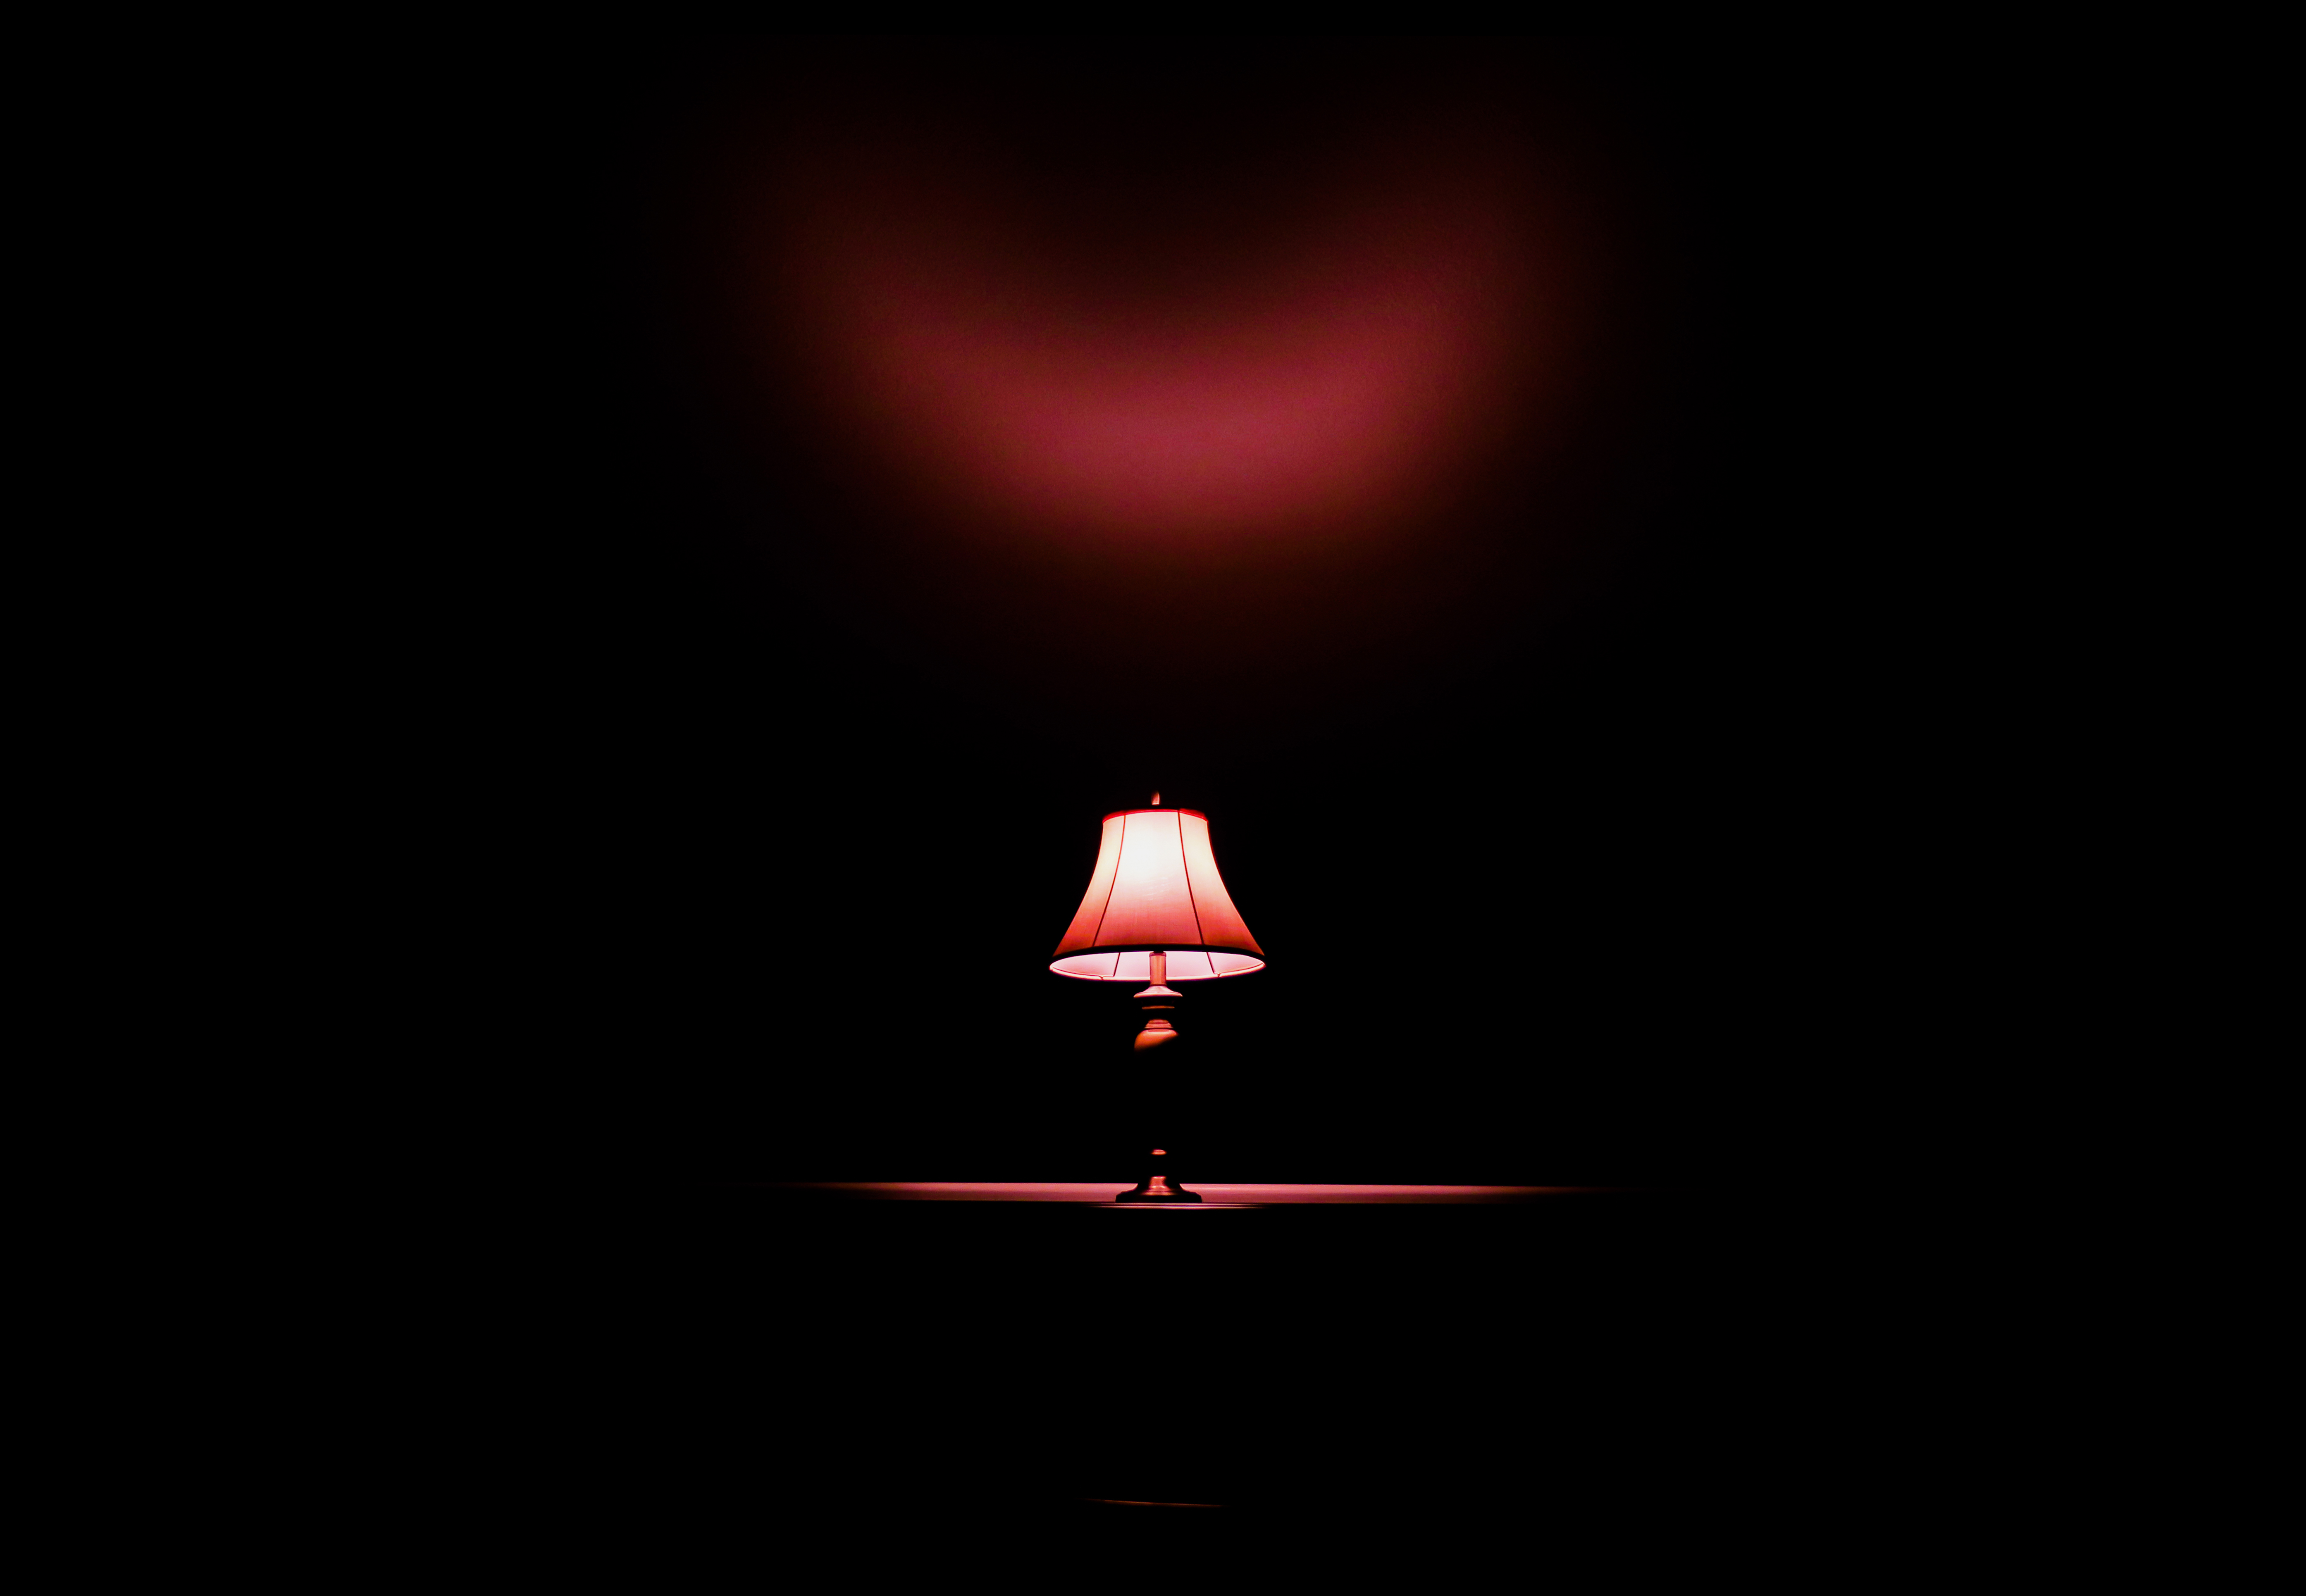 Popular Lamp Image for Phone